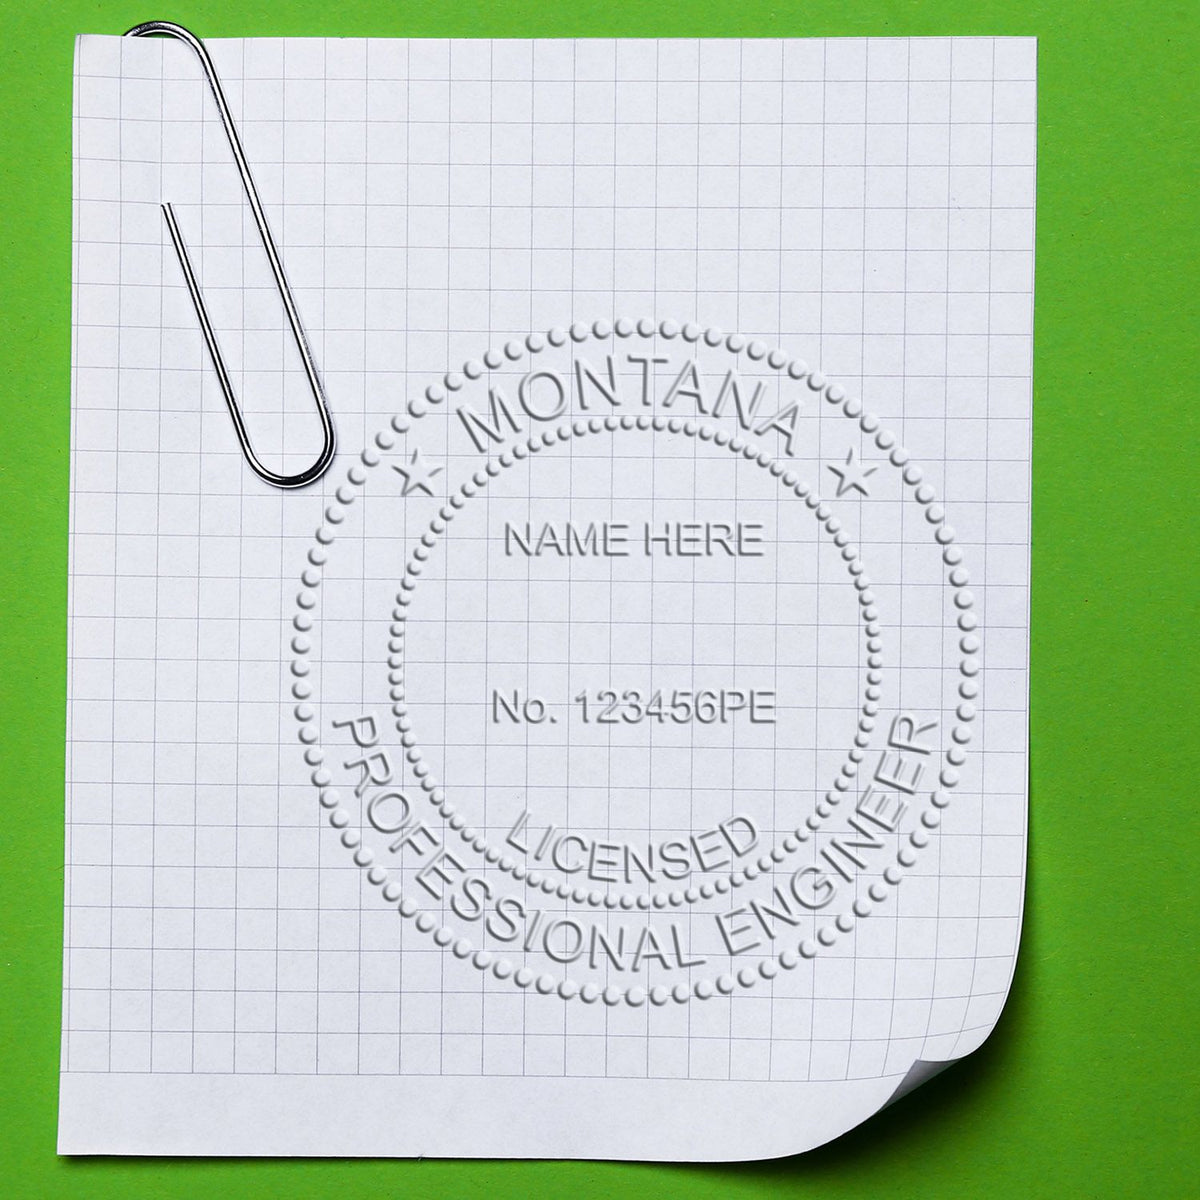 An alternative view of the Heavy Duty Cast Iron Montana Engineer Seal Embosser stamped on a sheet of paper showing the image in use